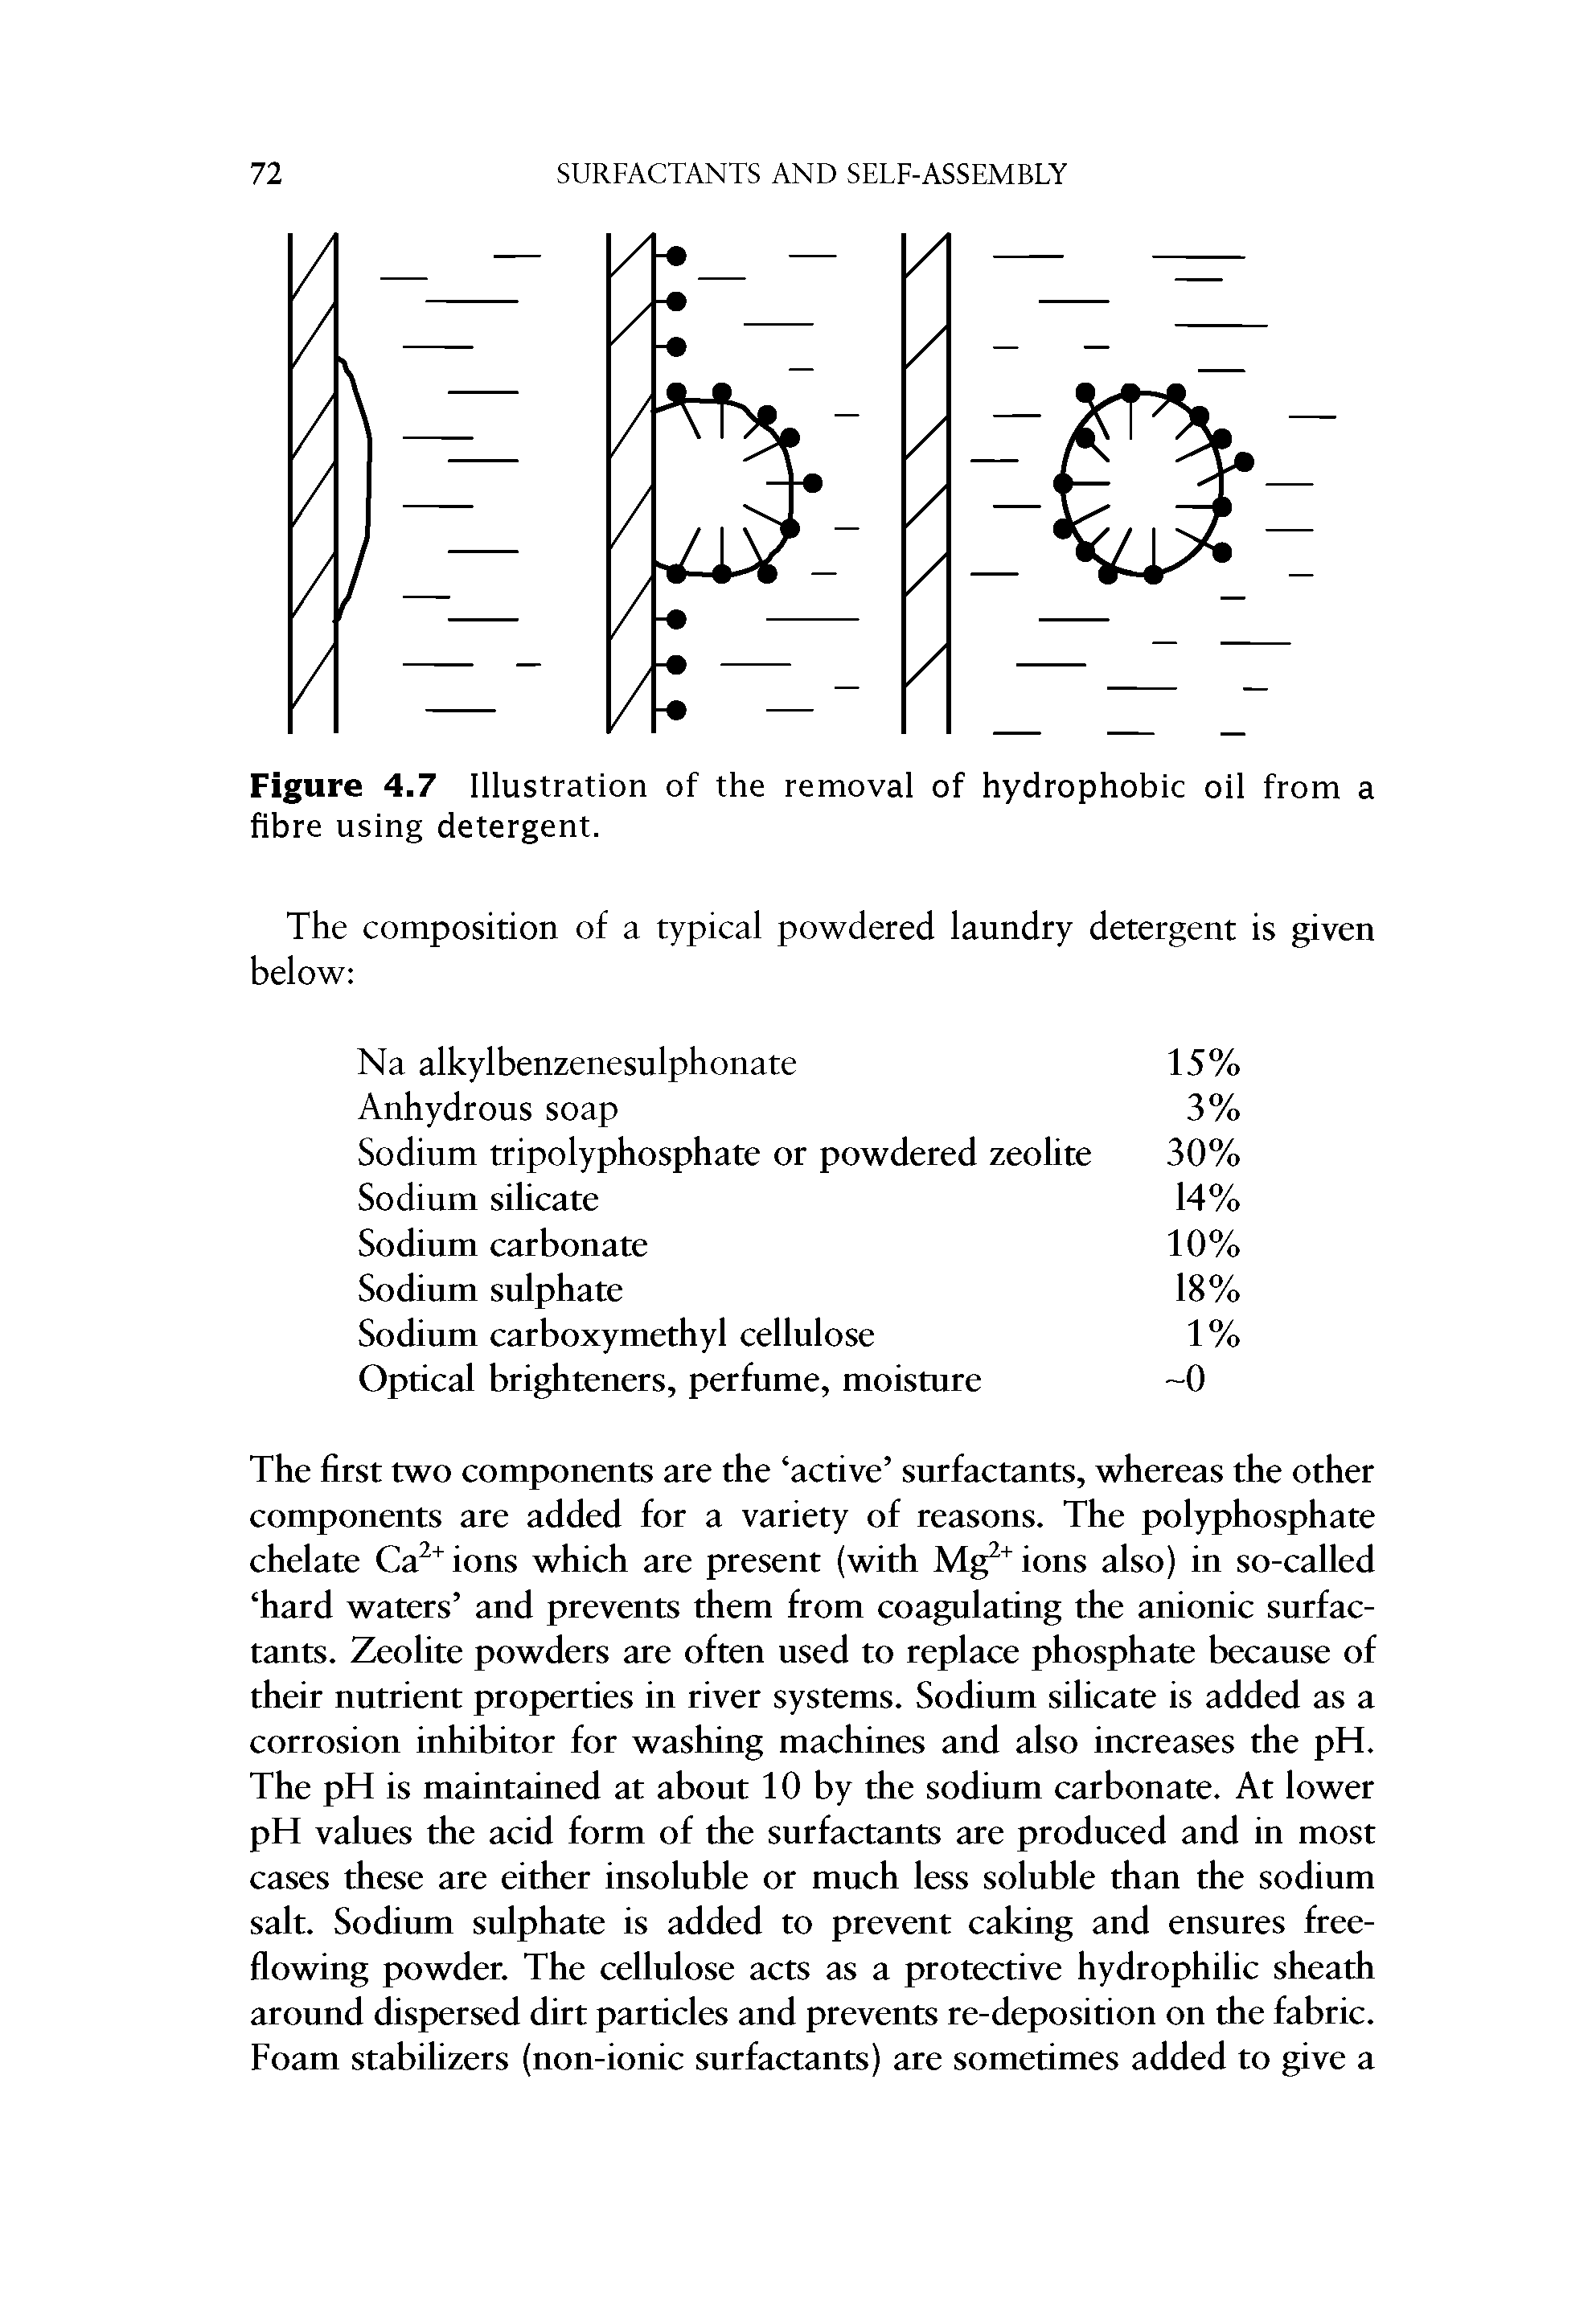 Figure 4.7 Illustration of the removal of hydrophobic oil from a fibre using detergent.